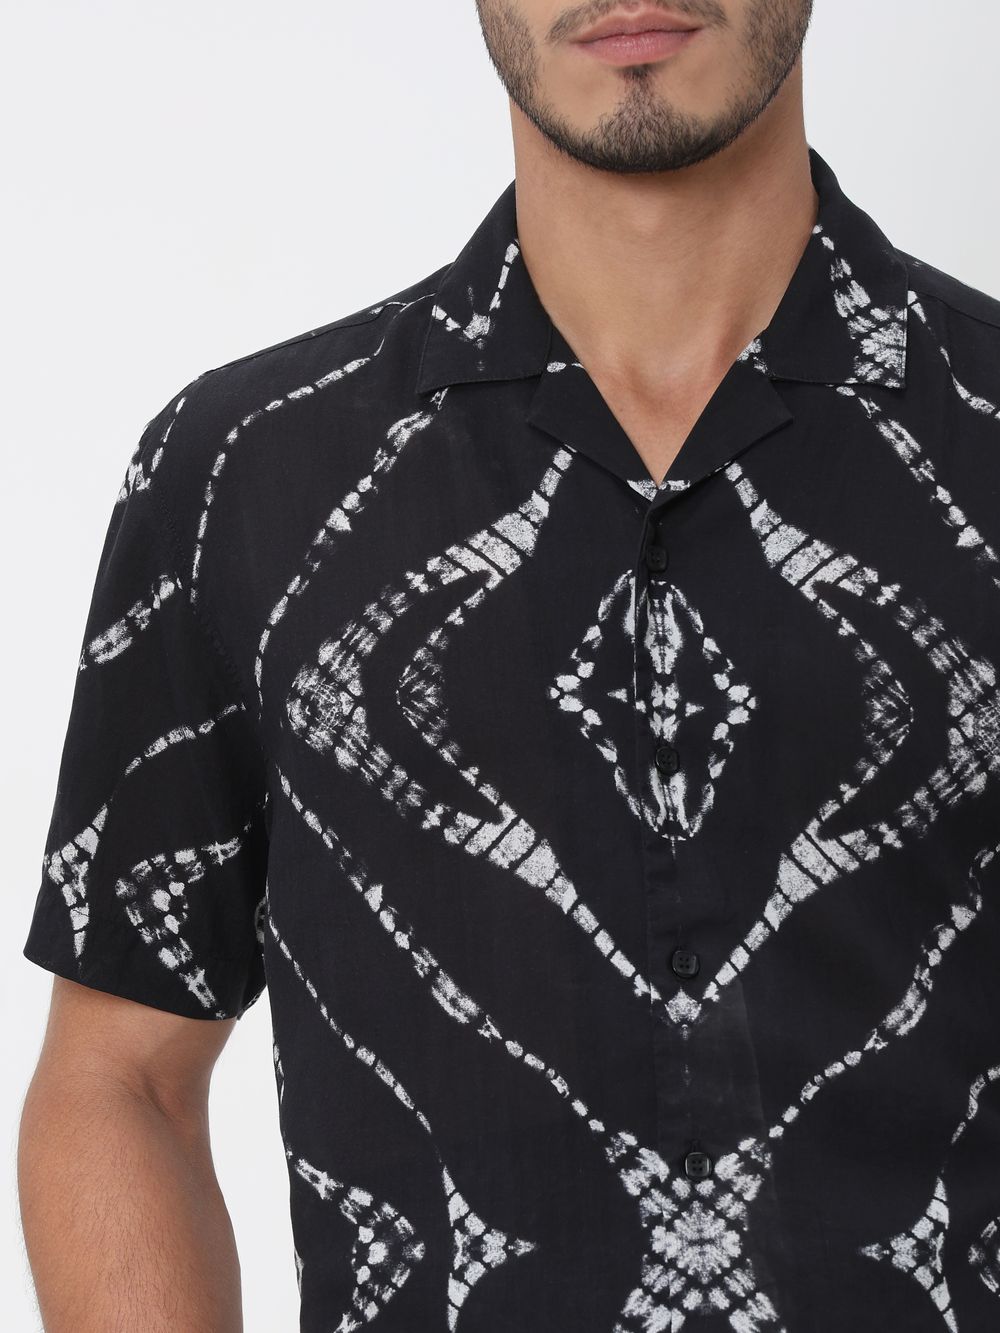 Black Digital Print Relaxed Fit Casual Shirt